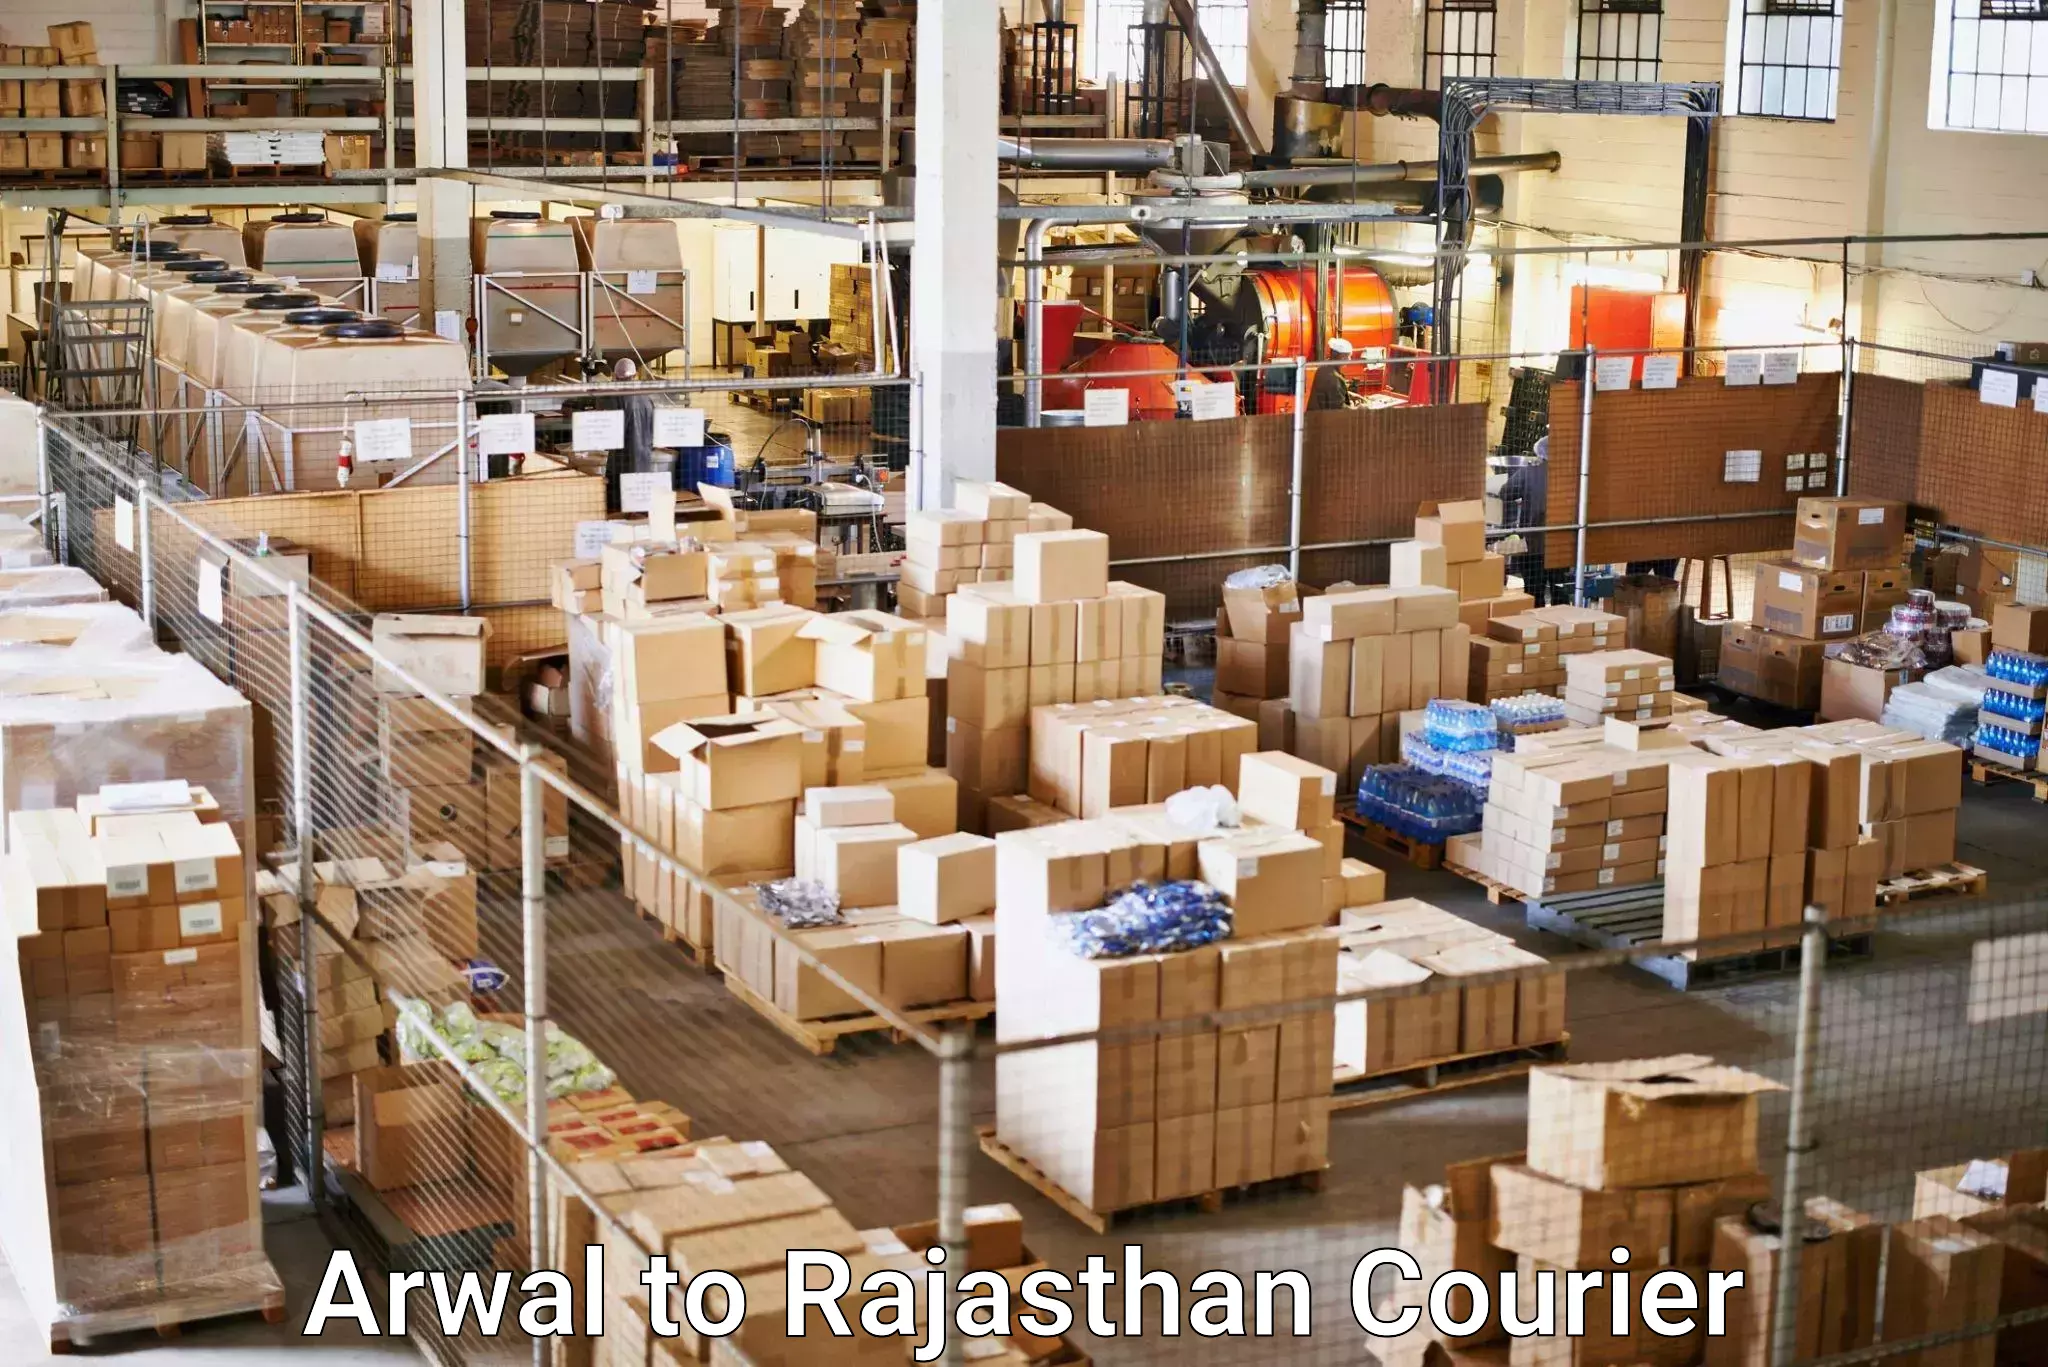 Cargo delivery service Arwal to Sidhmukh